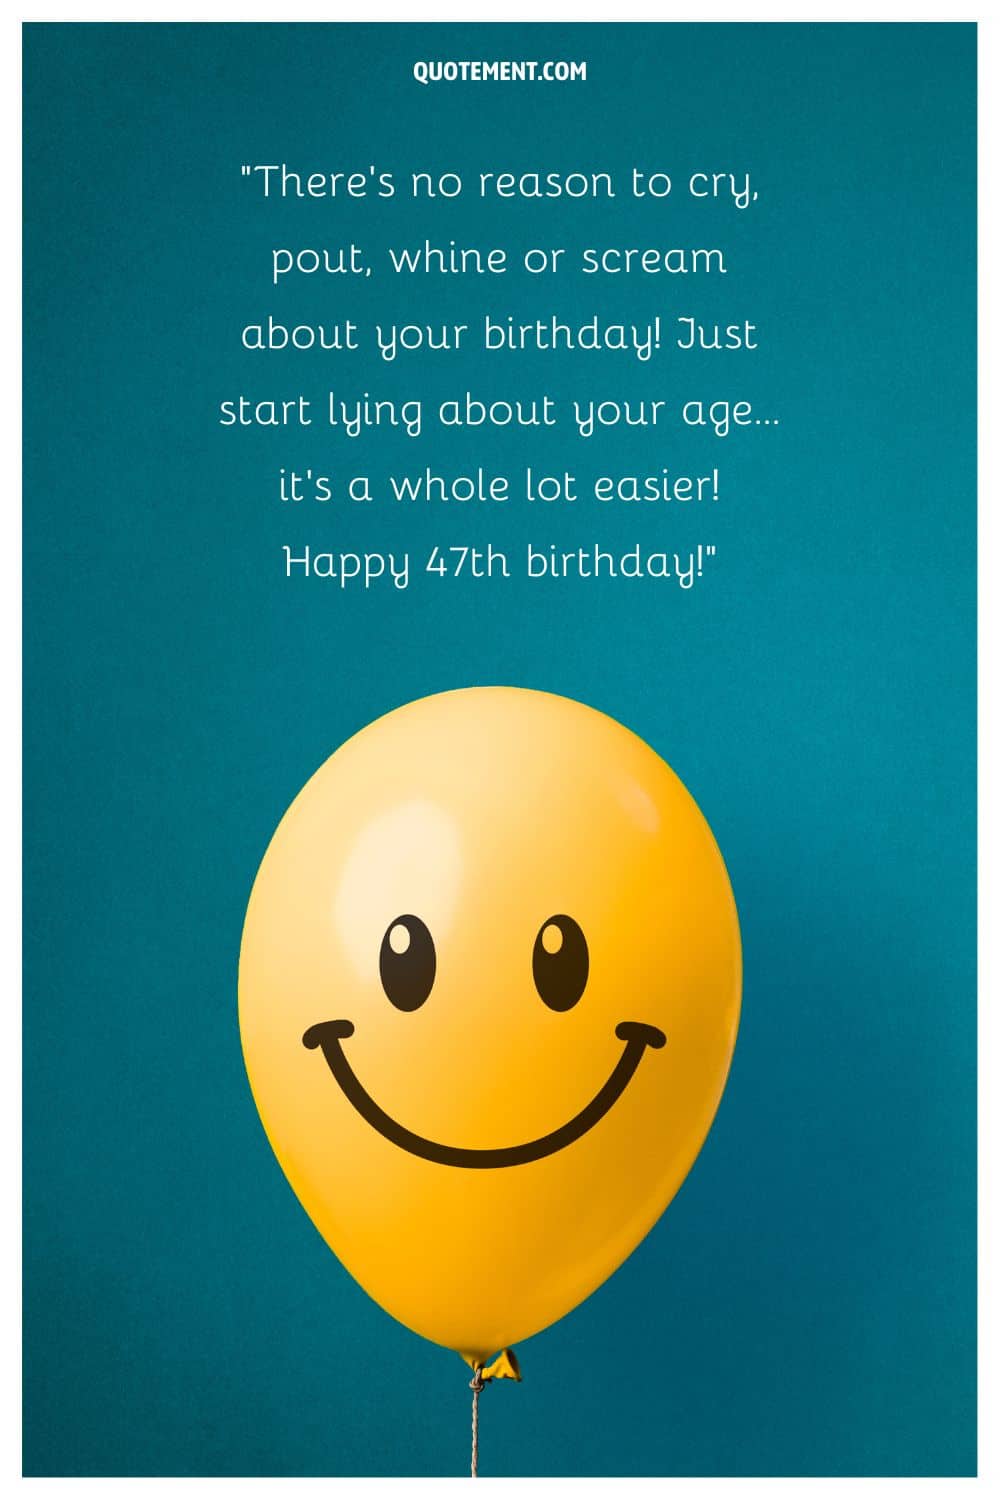 Funny message for their 47th birthday and a smiley face balloon below
